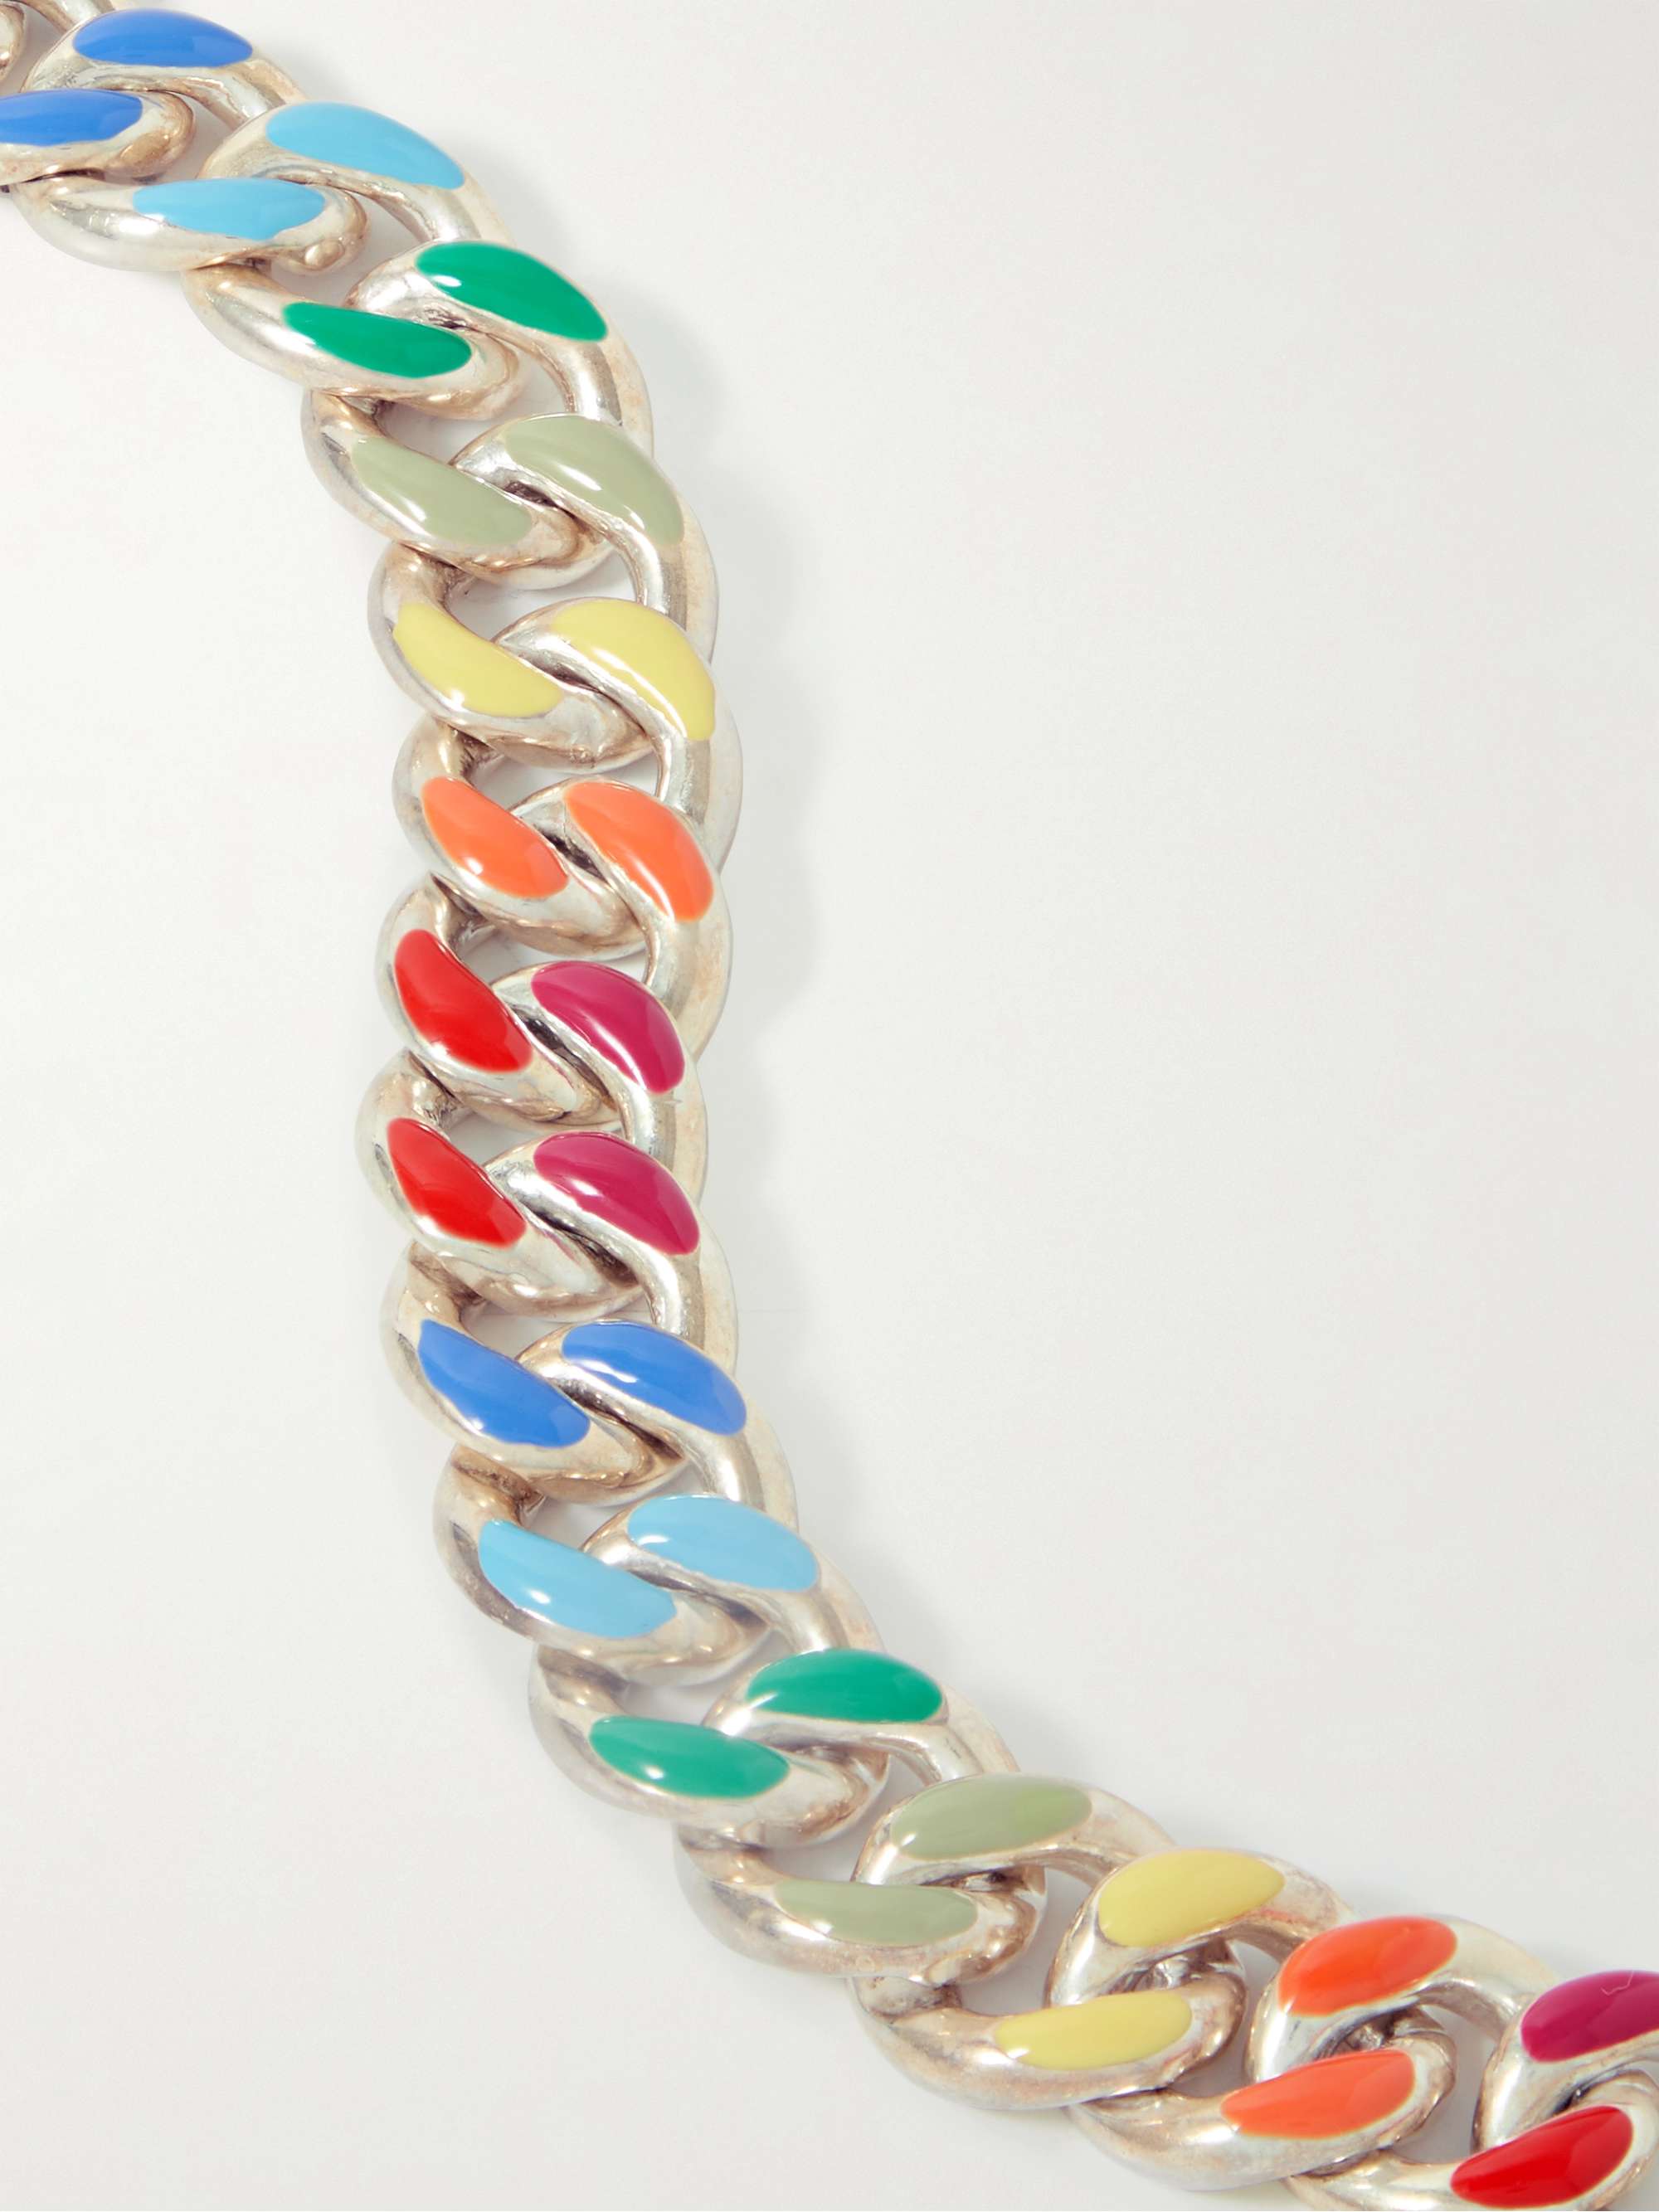 FRY POWERS Rainbow Sterling Silver and Enamel Chain Bracelet